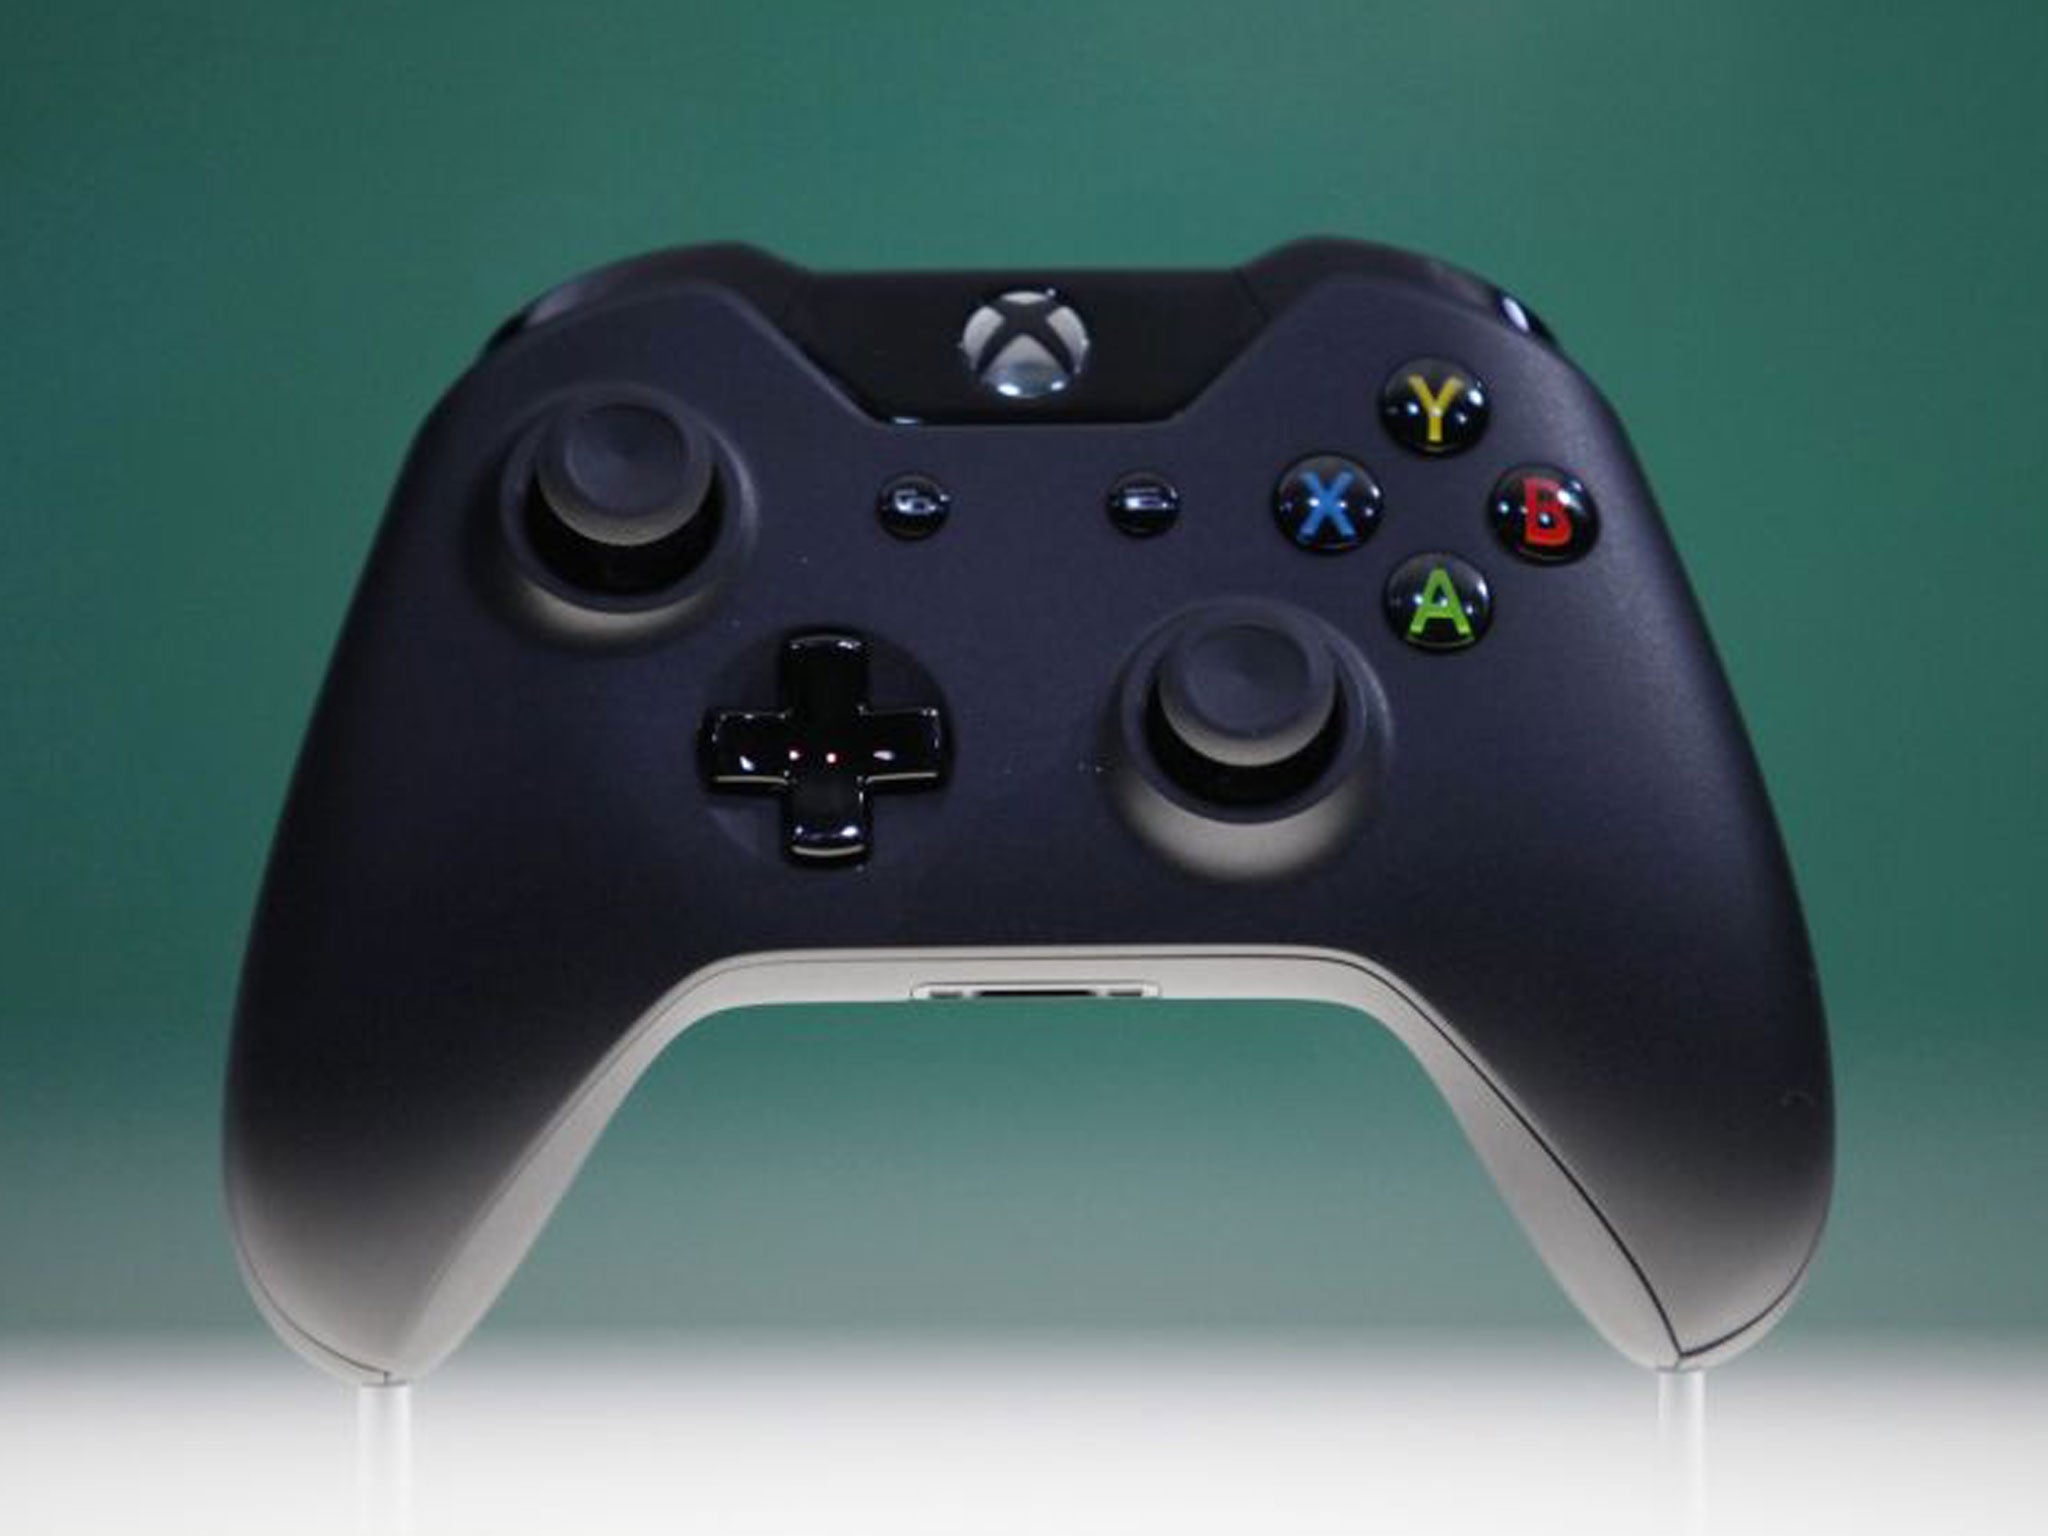 Xbox One Controller is shown during a press event unveiling Microsoft's new Xbox in Redmond, Washington